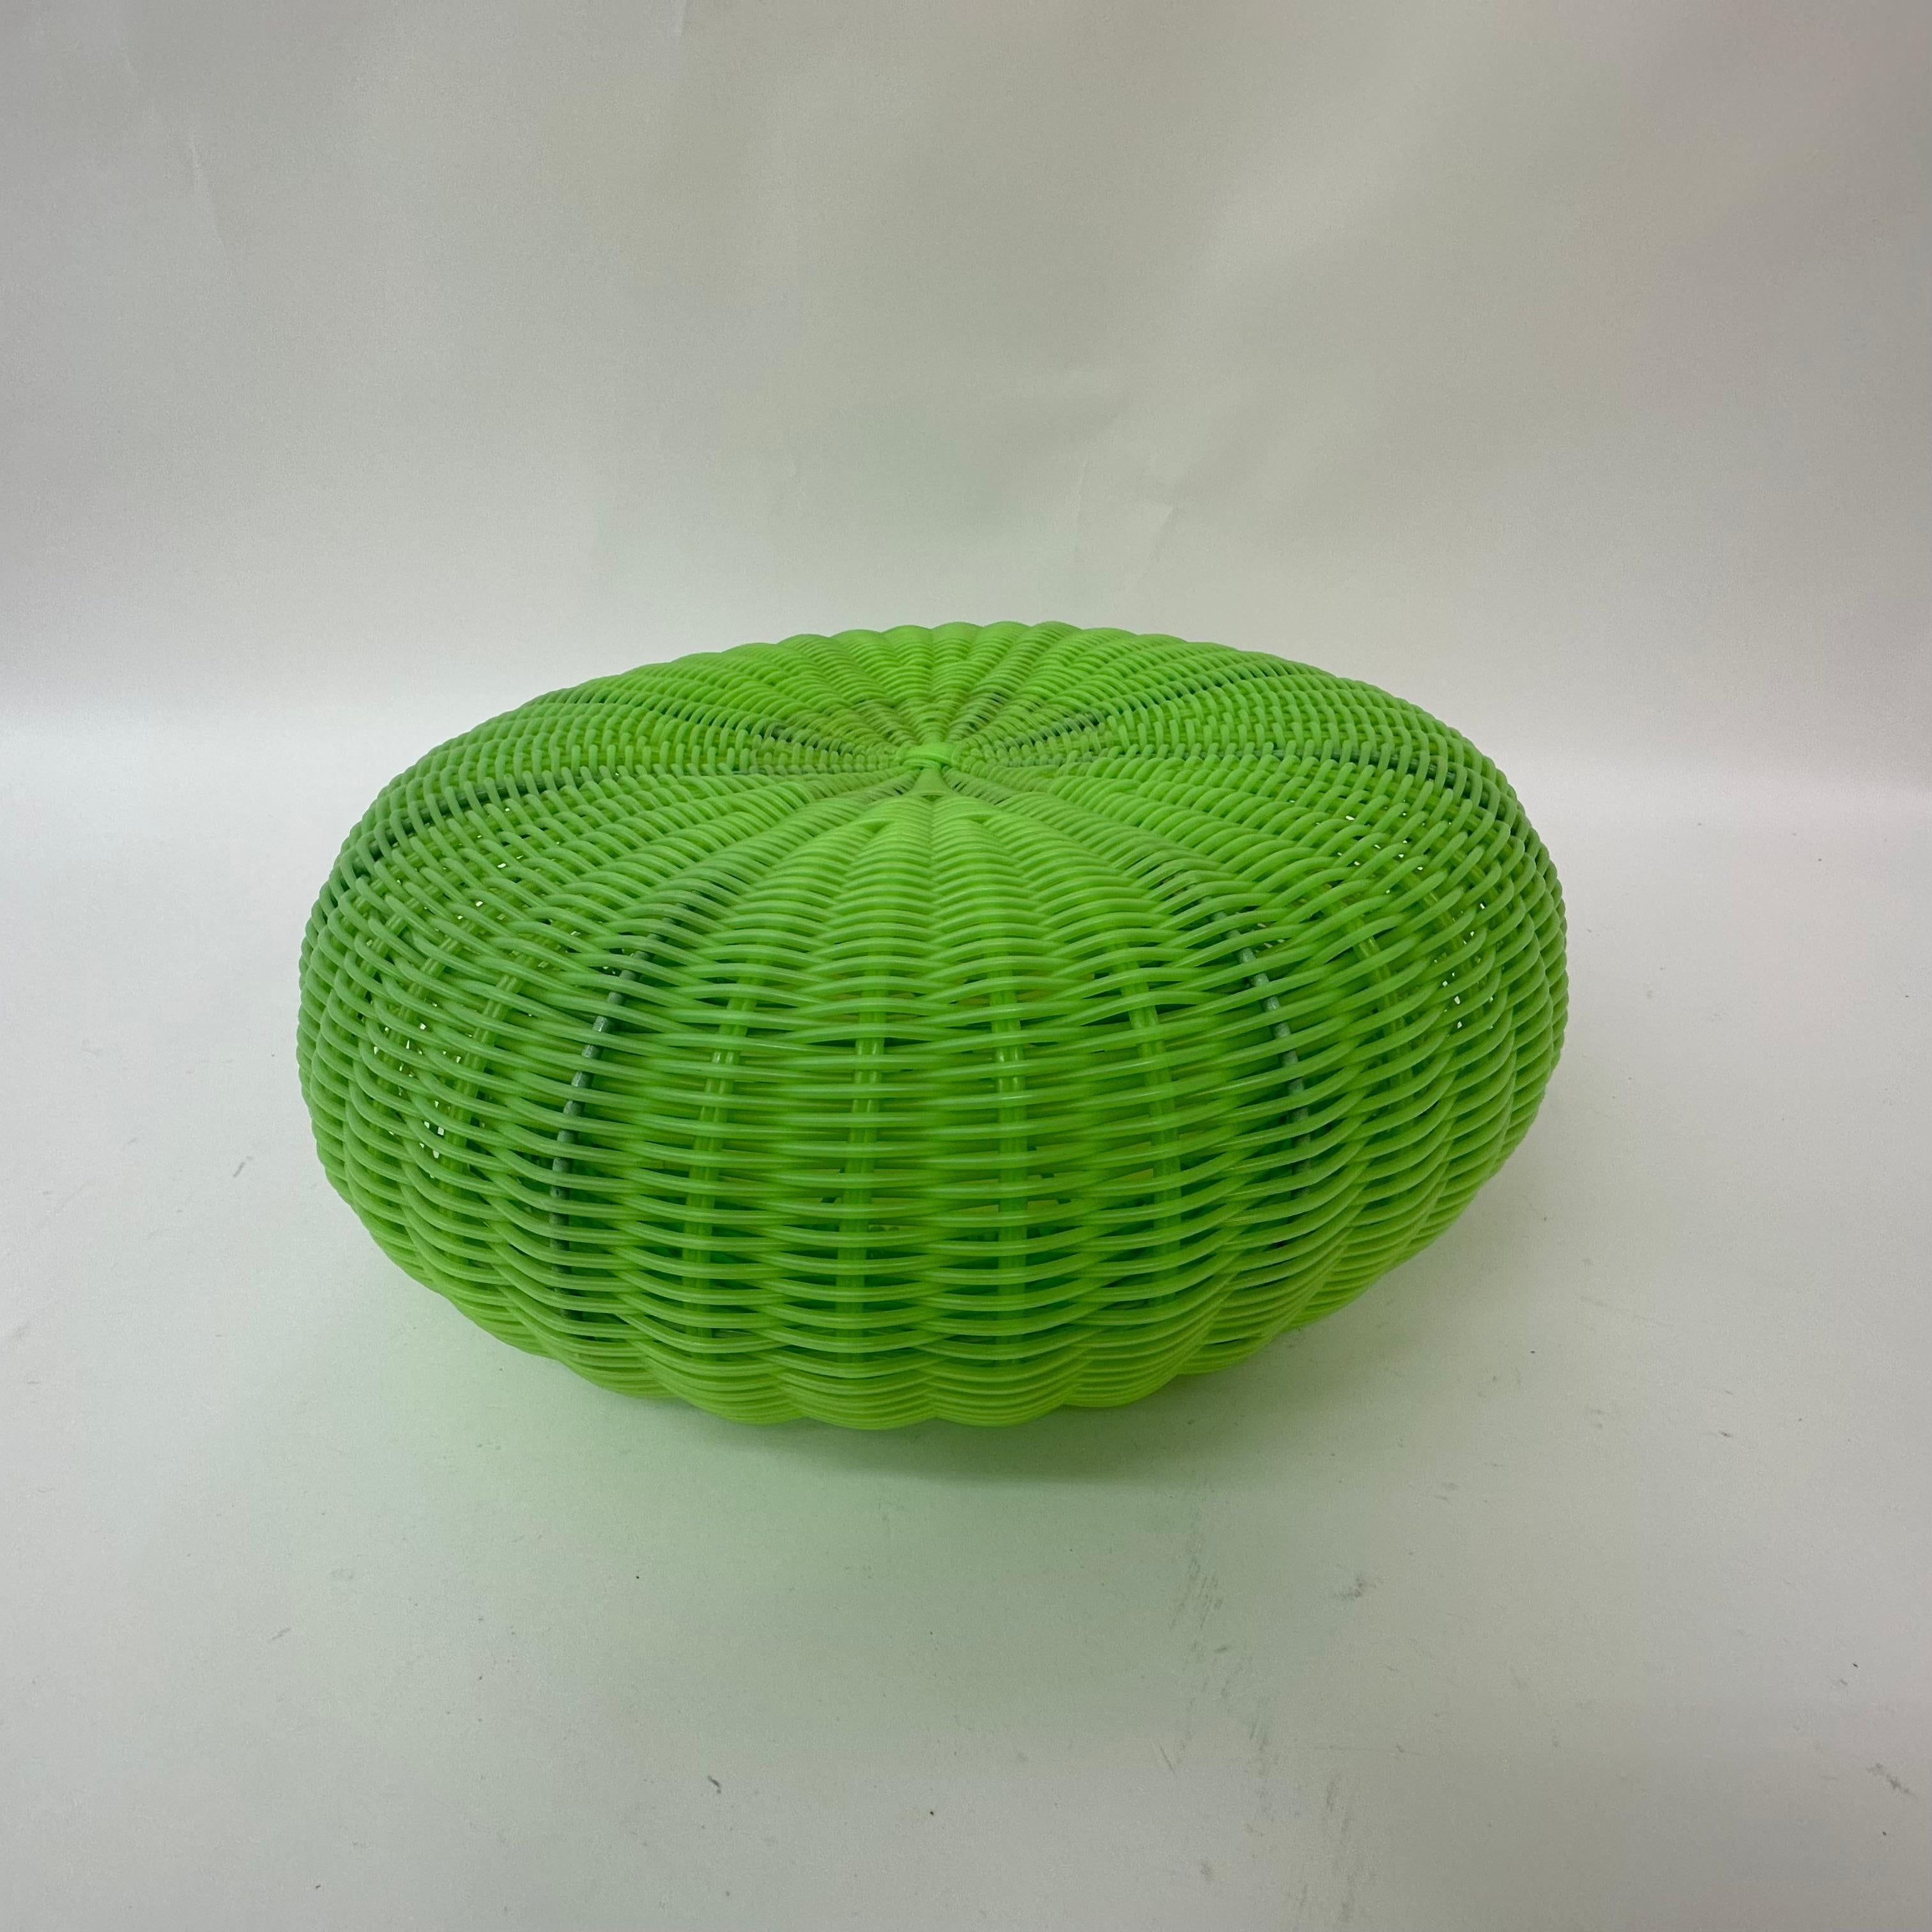 Late 20th Century Vintage Ikea green woven plastic Pouf , 1990's